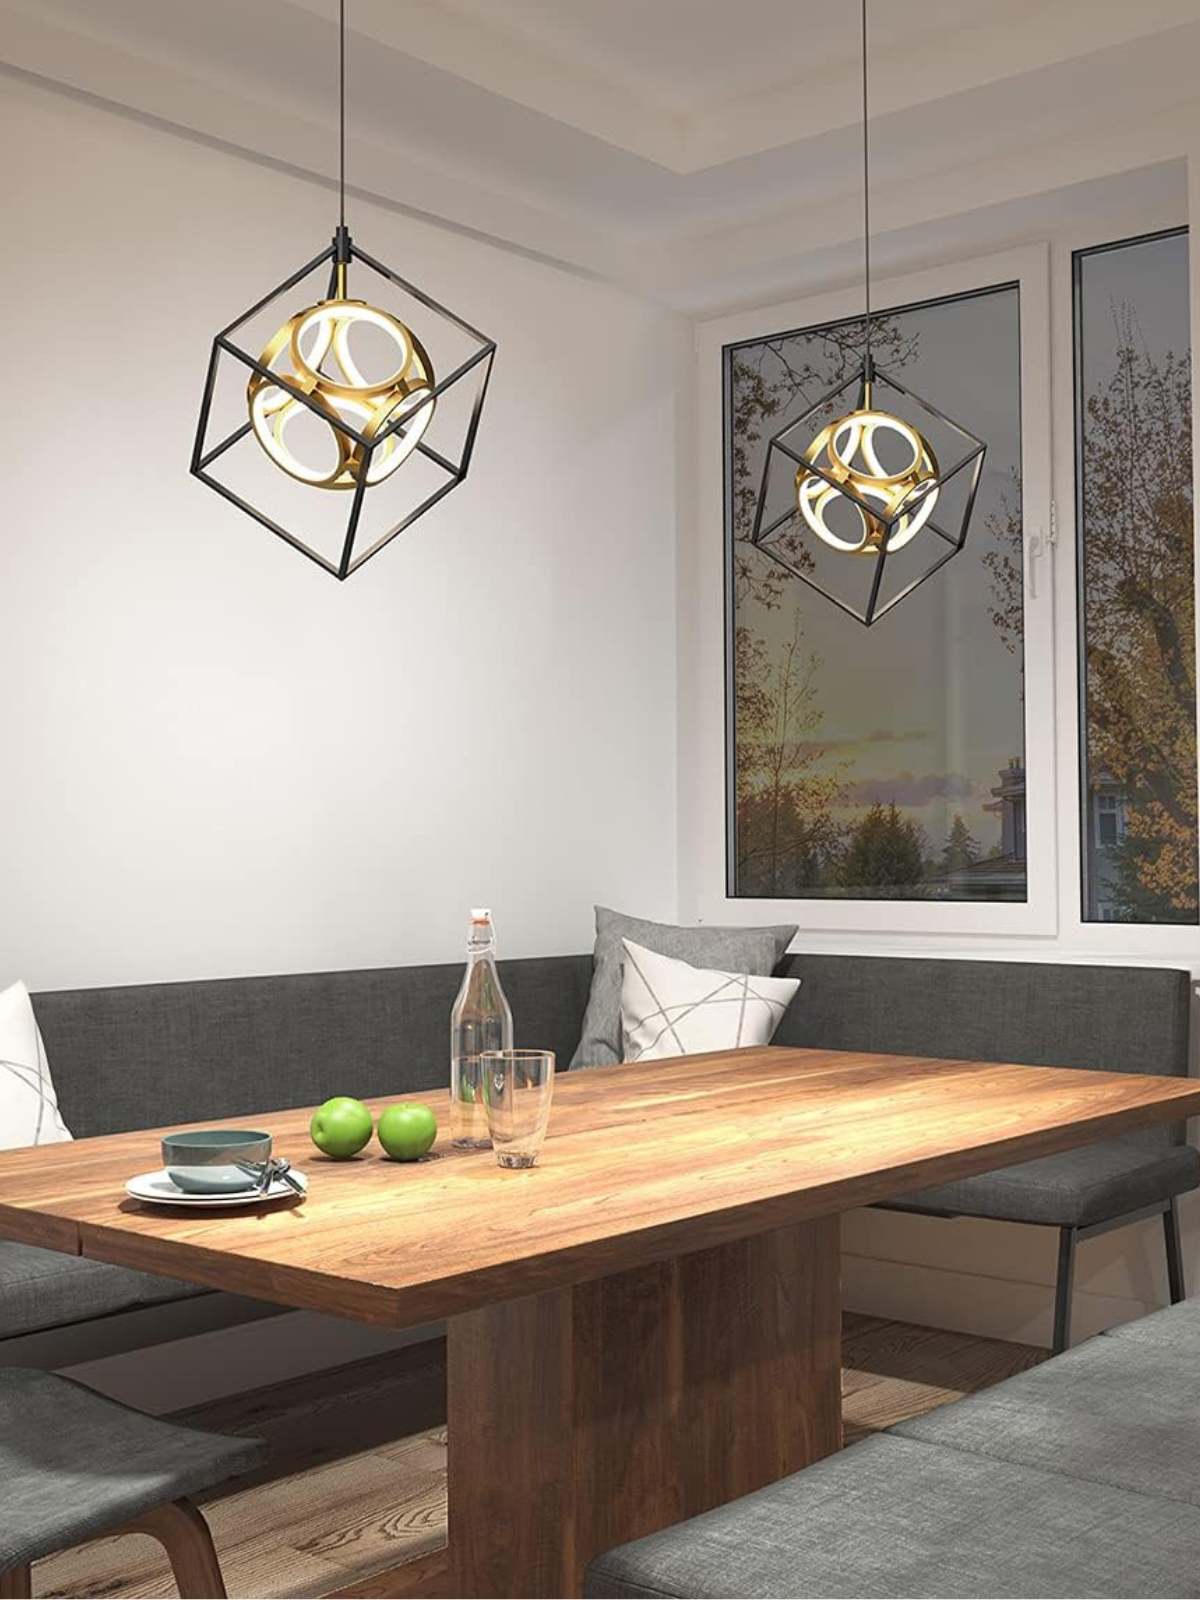 Luxury 18W LED Geometric Pendant Light Fixture, Black and Gold Finish - Ideal for Dining Room, Kitchen Island Light - 1000 Lumens, 2700 Kelvin, No Bulb Required